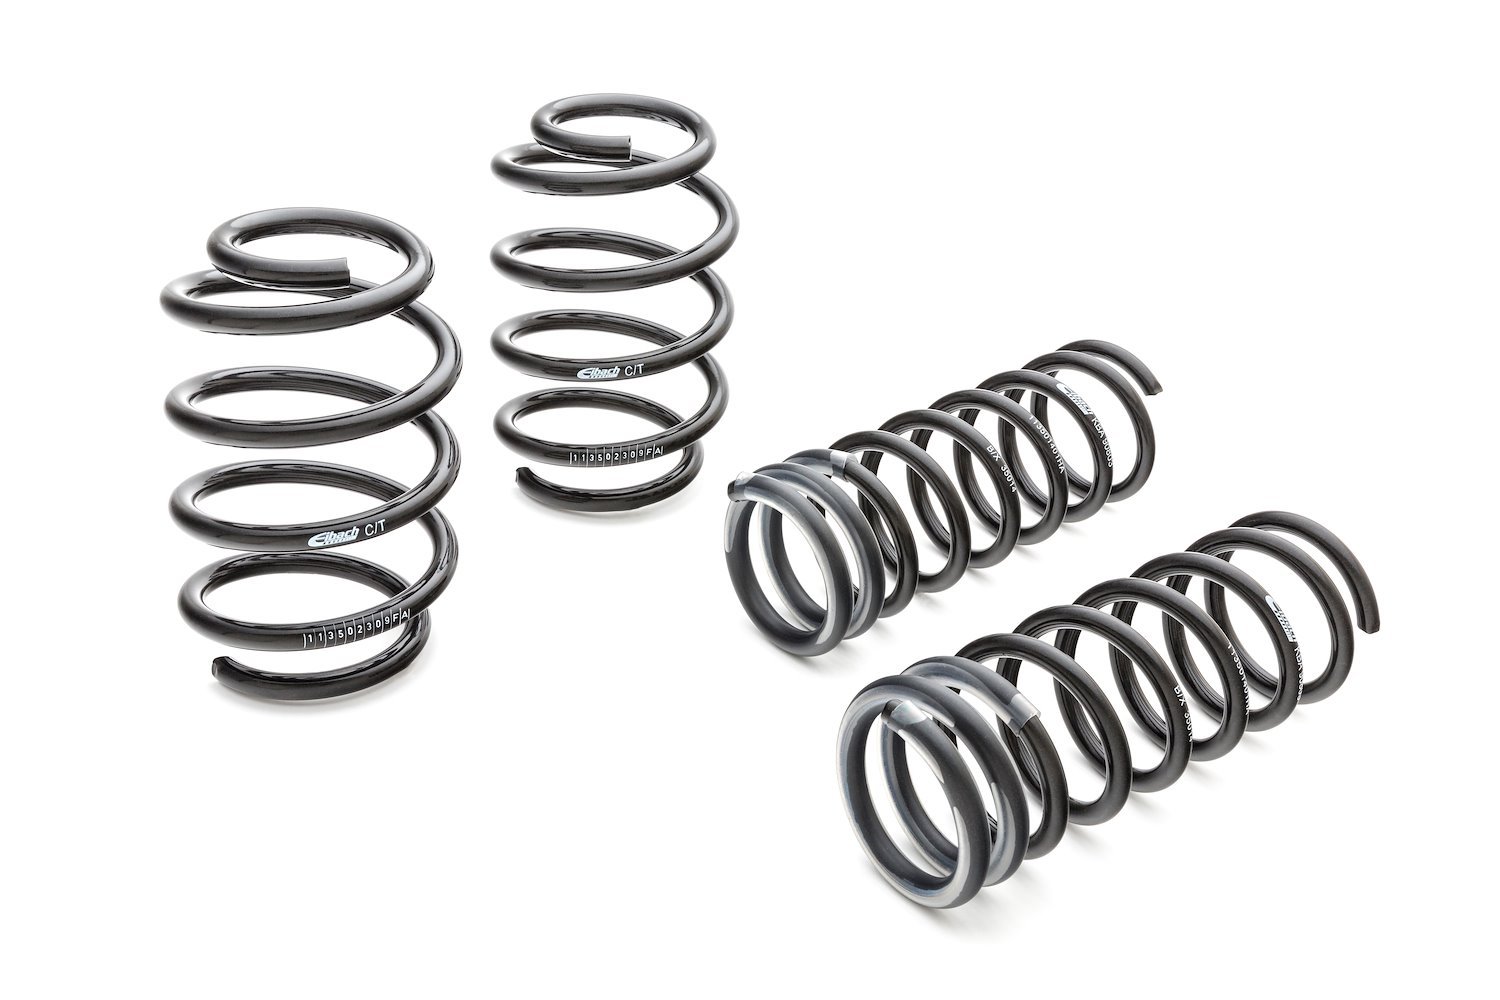 28111.140 Pro-Kit Lowering Springs 2011-2016 Dodge Challenger R/T - 1.400 in. Front/1.700 in. Rear Drop